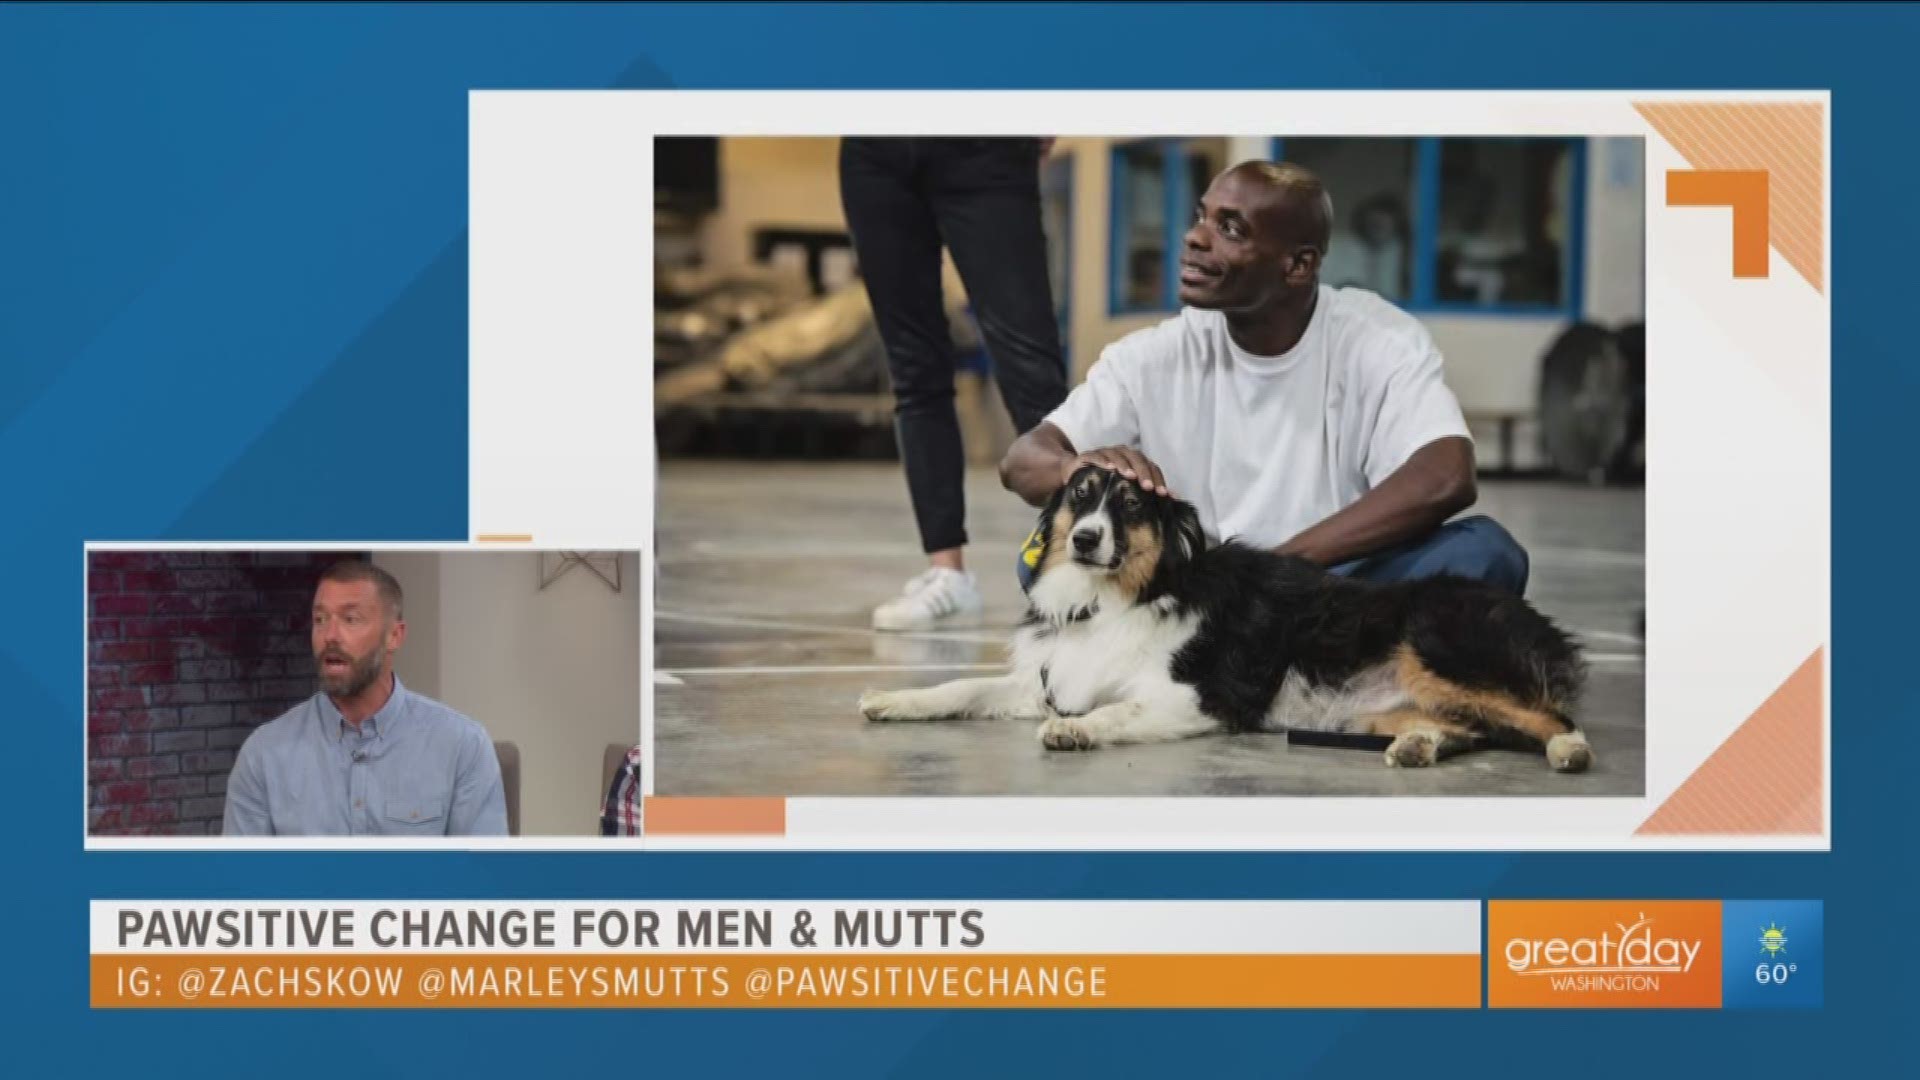 See how Zack Skow's new program "Pawsitive Change" brings together rescue dogs and incarcerated individuals to improve lives.  For more information visit MarleysMutts.org/PawsitiveChange.